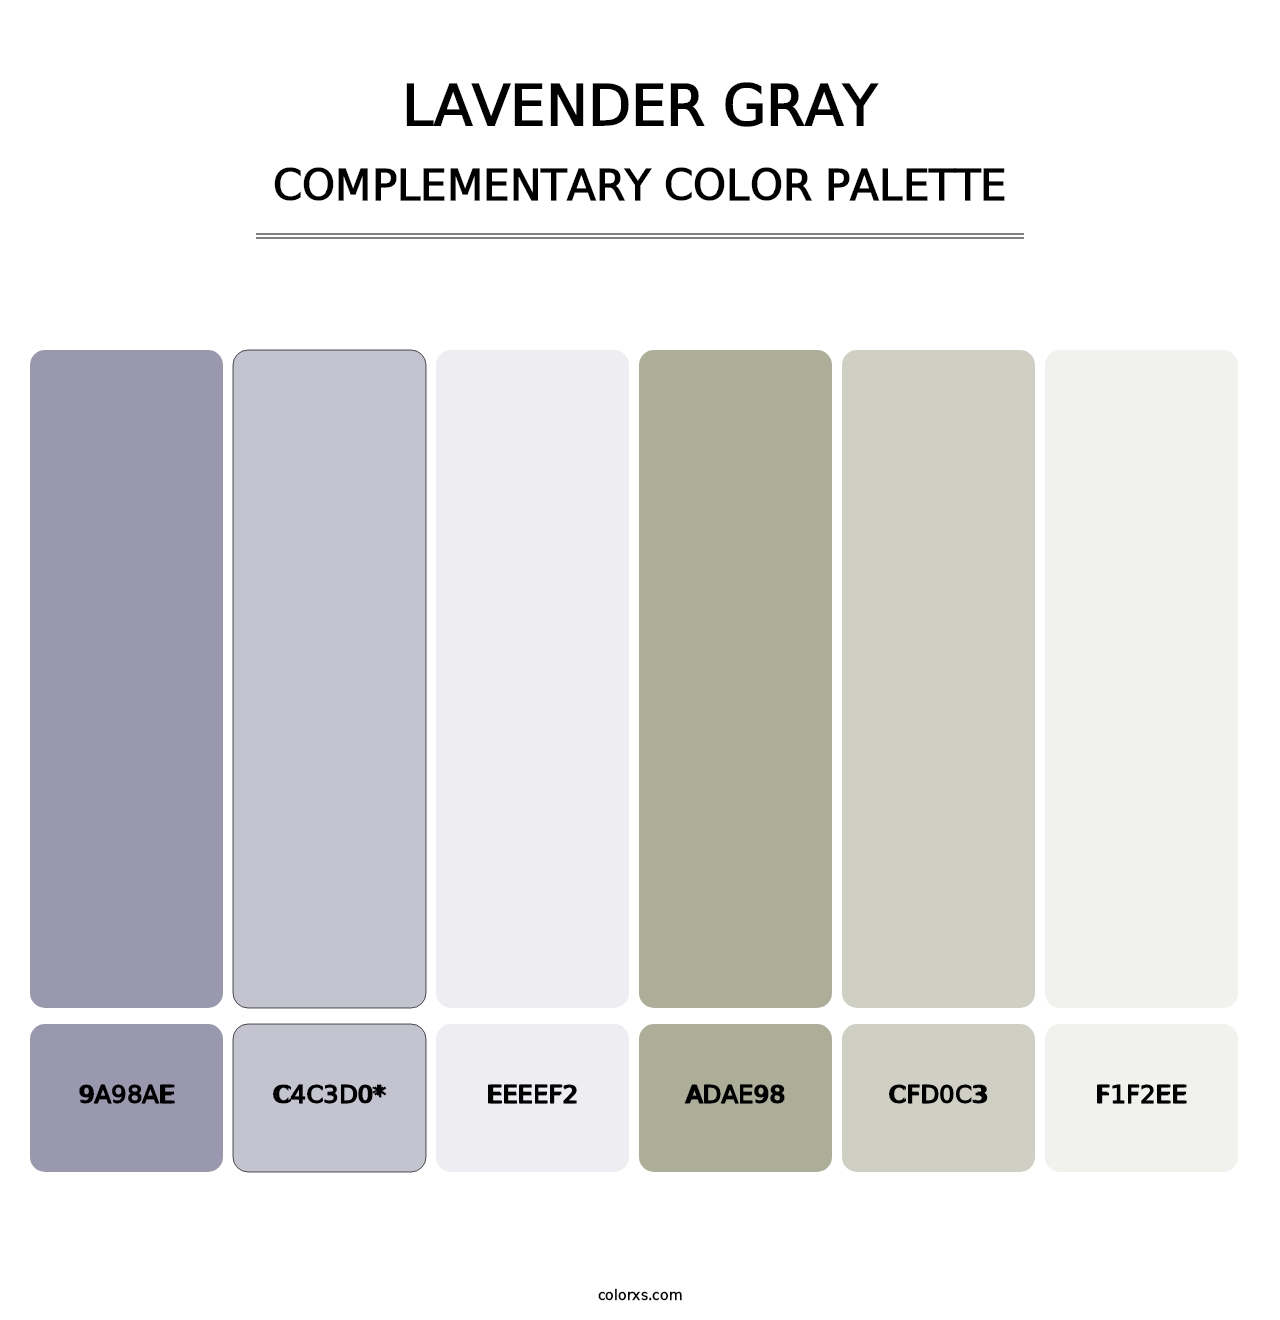 Lavender Gray - Complementary Color Palette